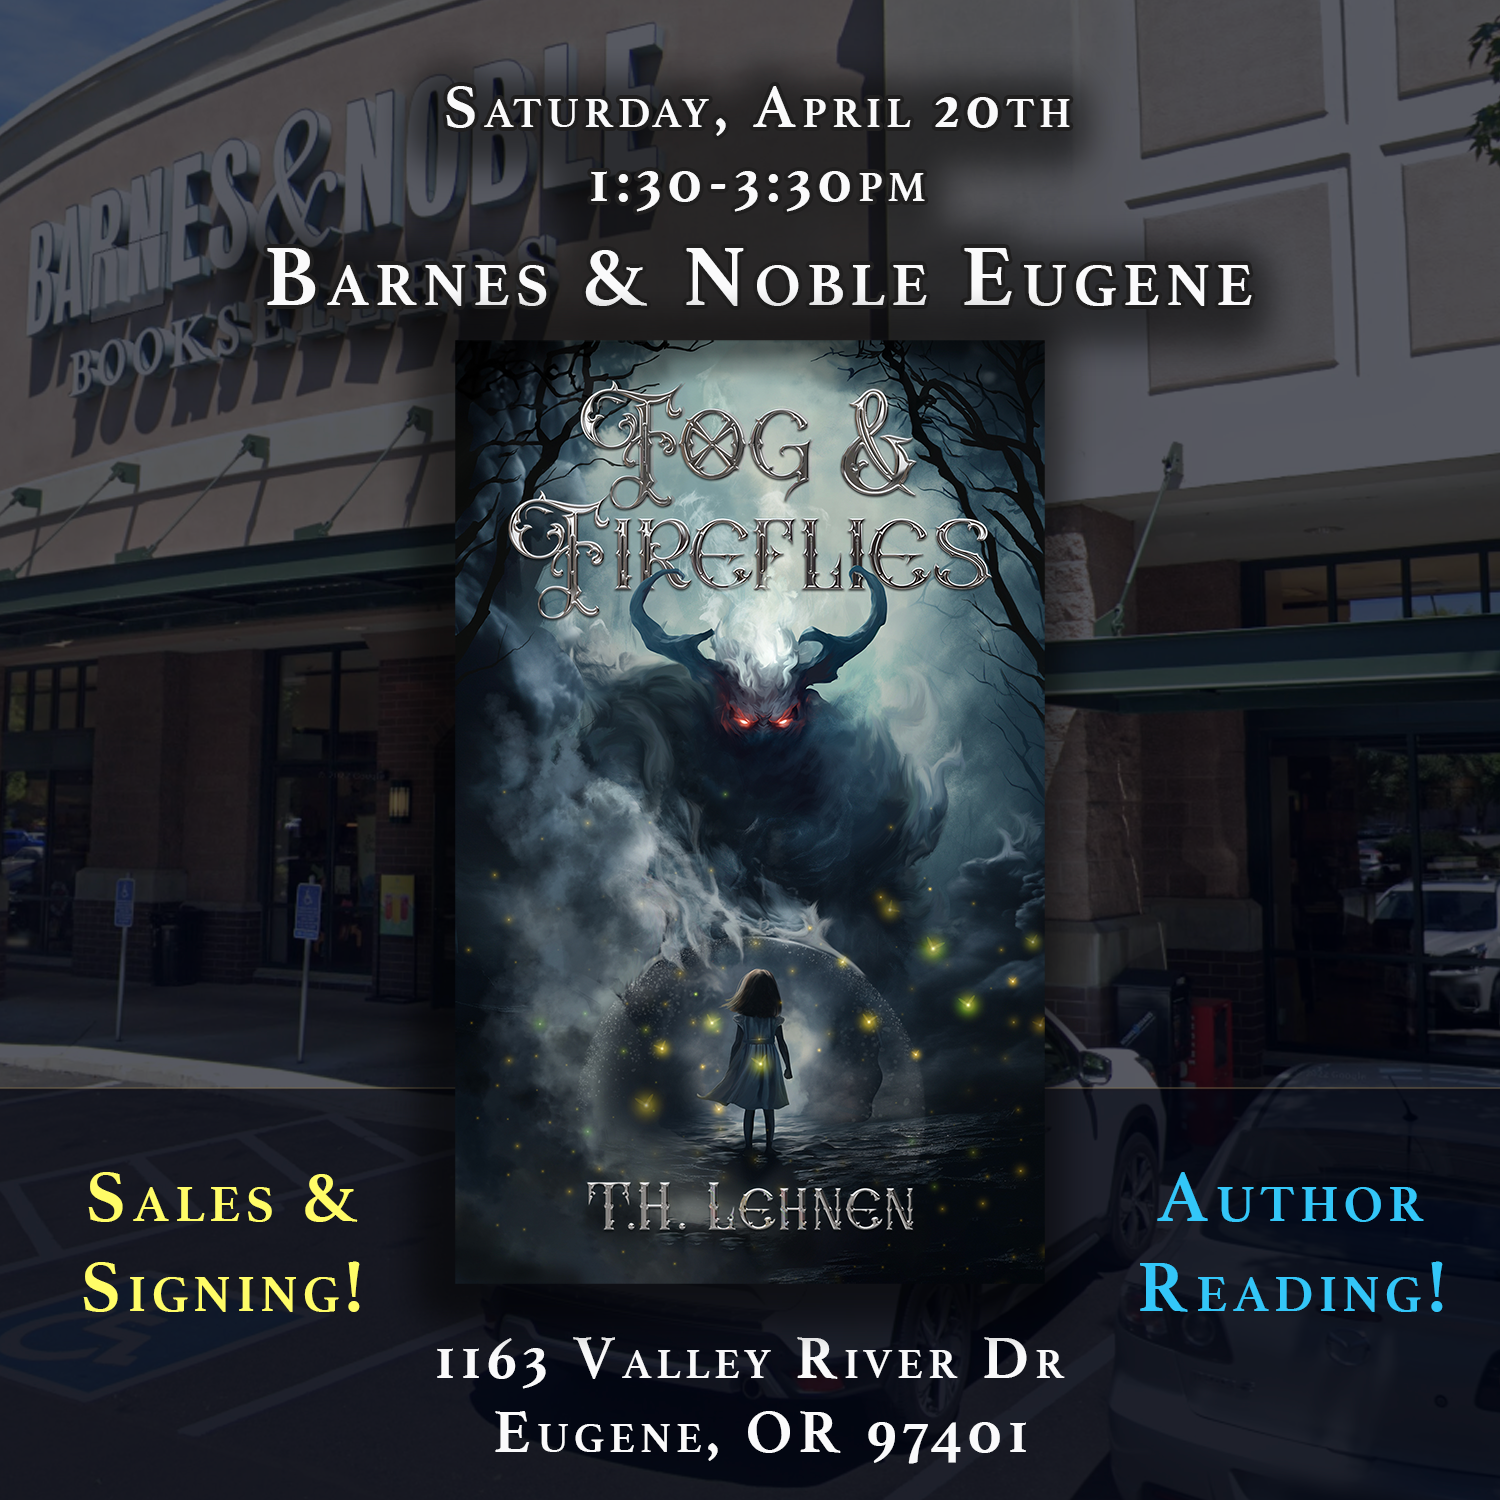 Fog & Fireflies book tour continues at Barnes & Noble Eugene on April 20th